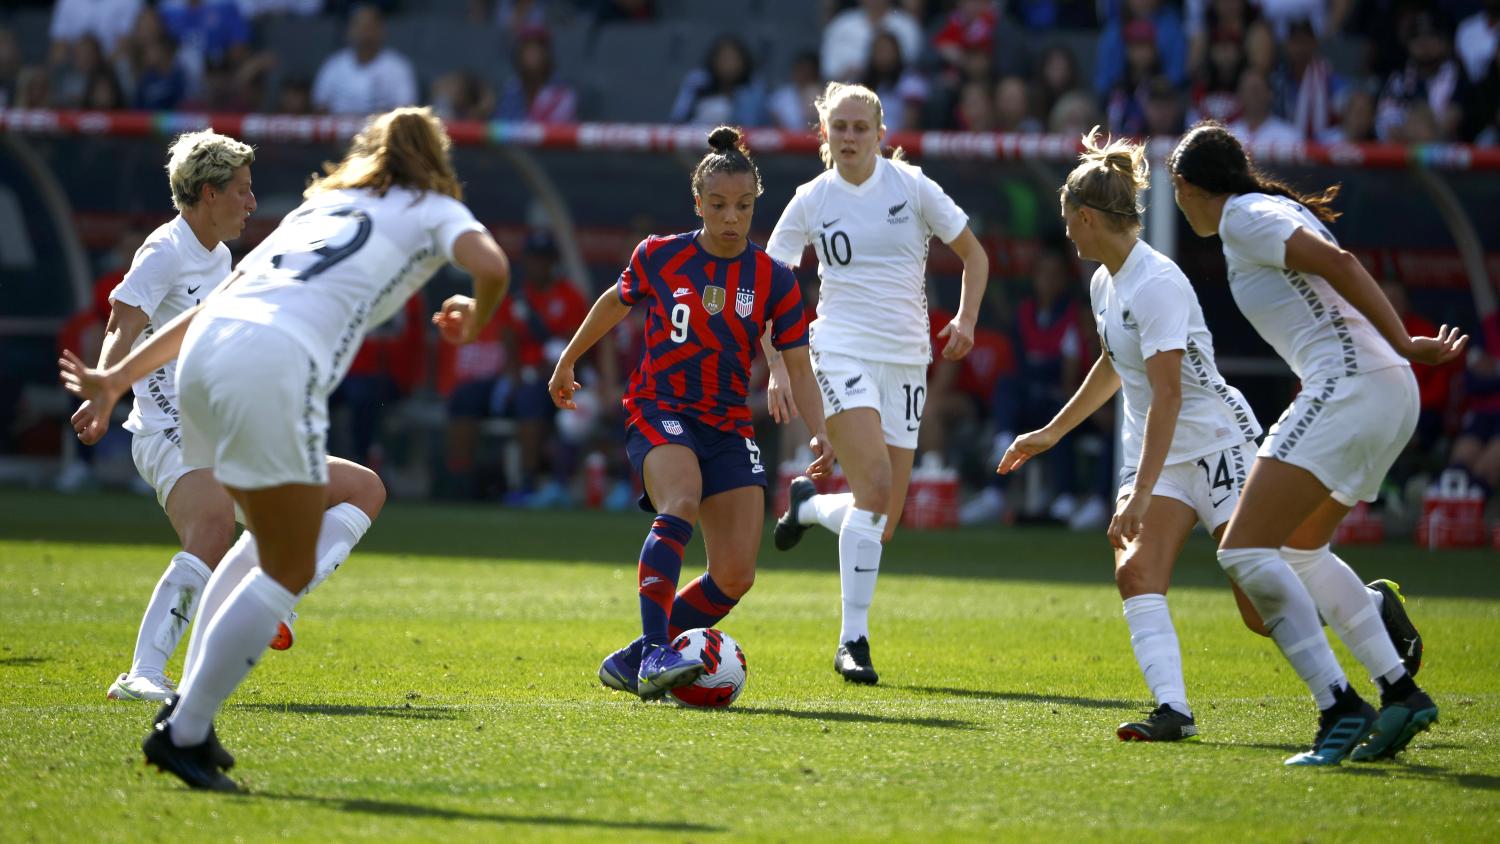 HBO Maxs Live Stream of Womens Soccer Match From New Zealand Indicates Future of Audio